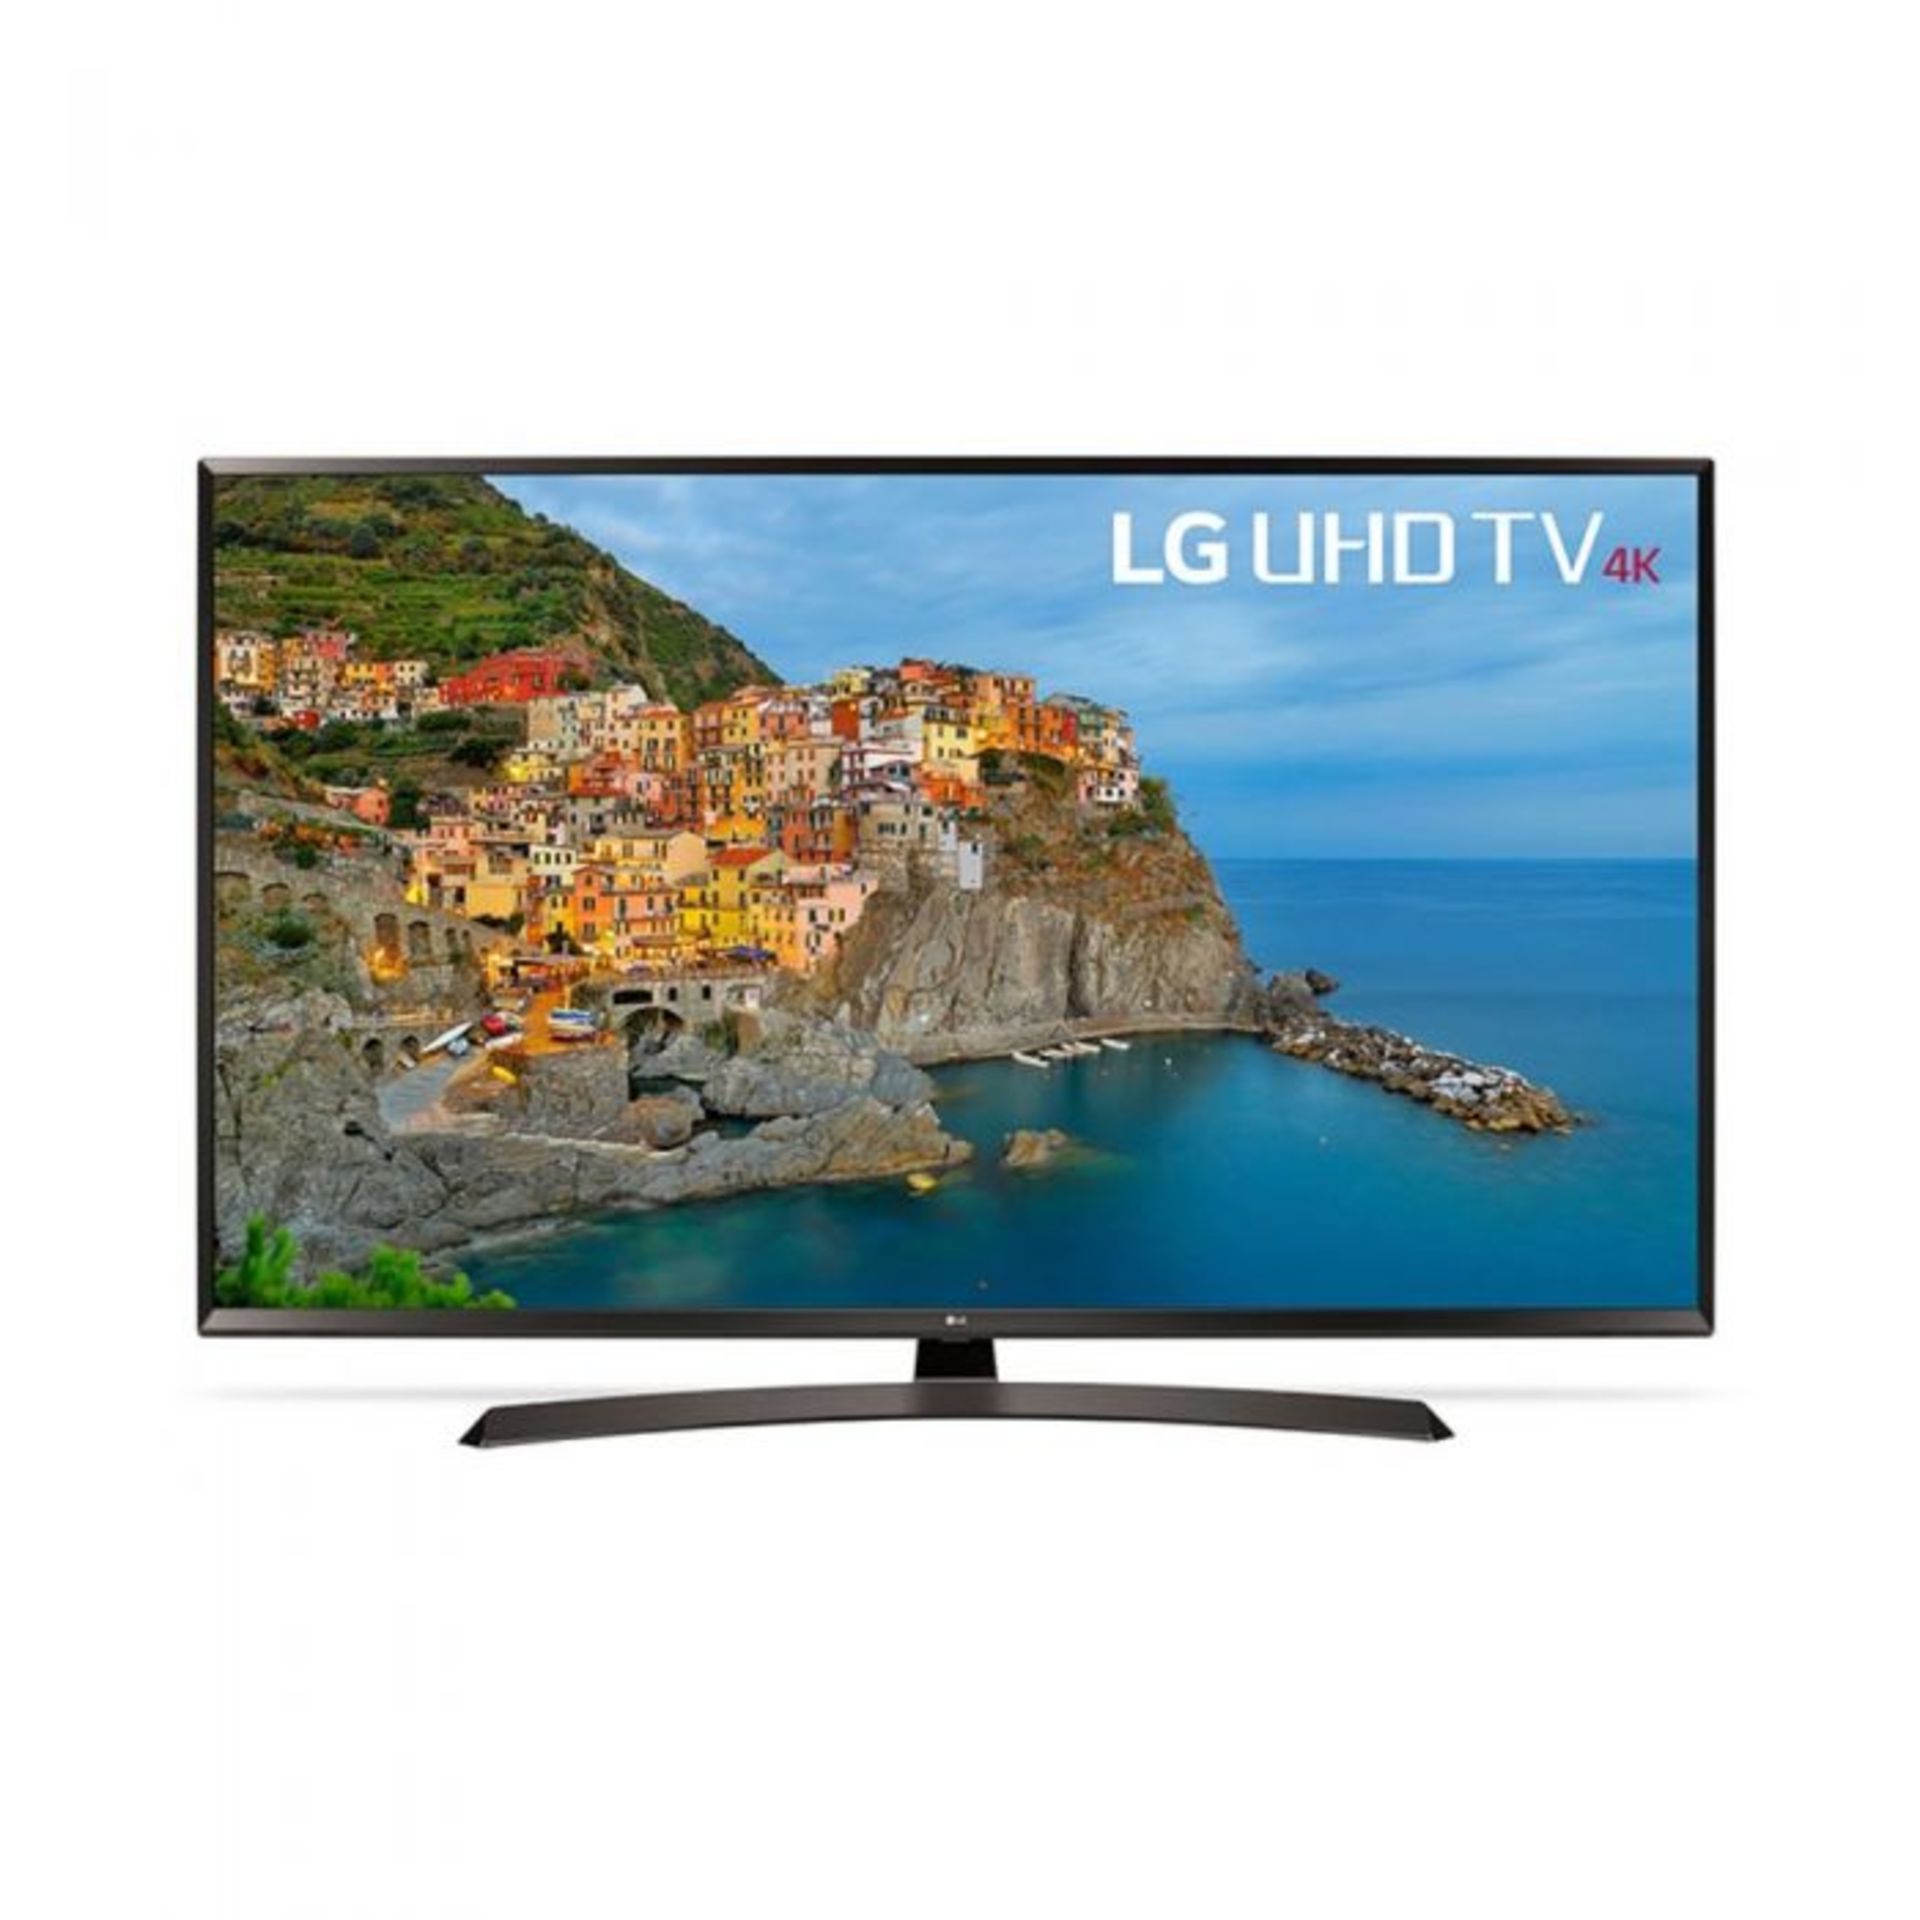 + VAT Grade A LG 49 Inch ACTIVE HDR 4K ULTRA HD LED SMART TV WITH FREEVIEW HD & WEBOS & WIFI